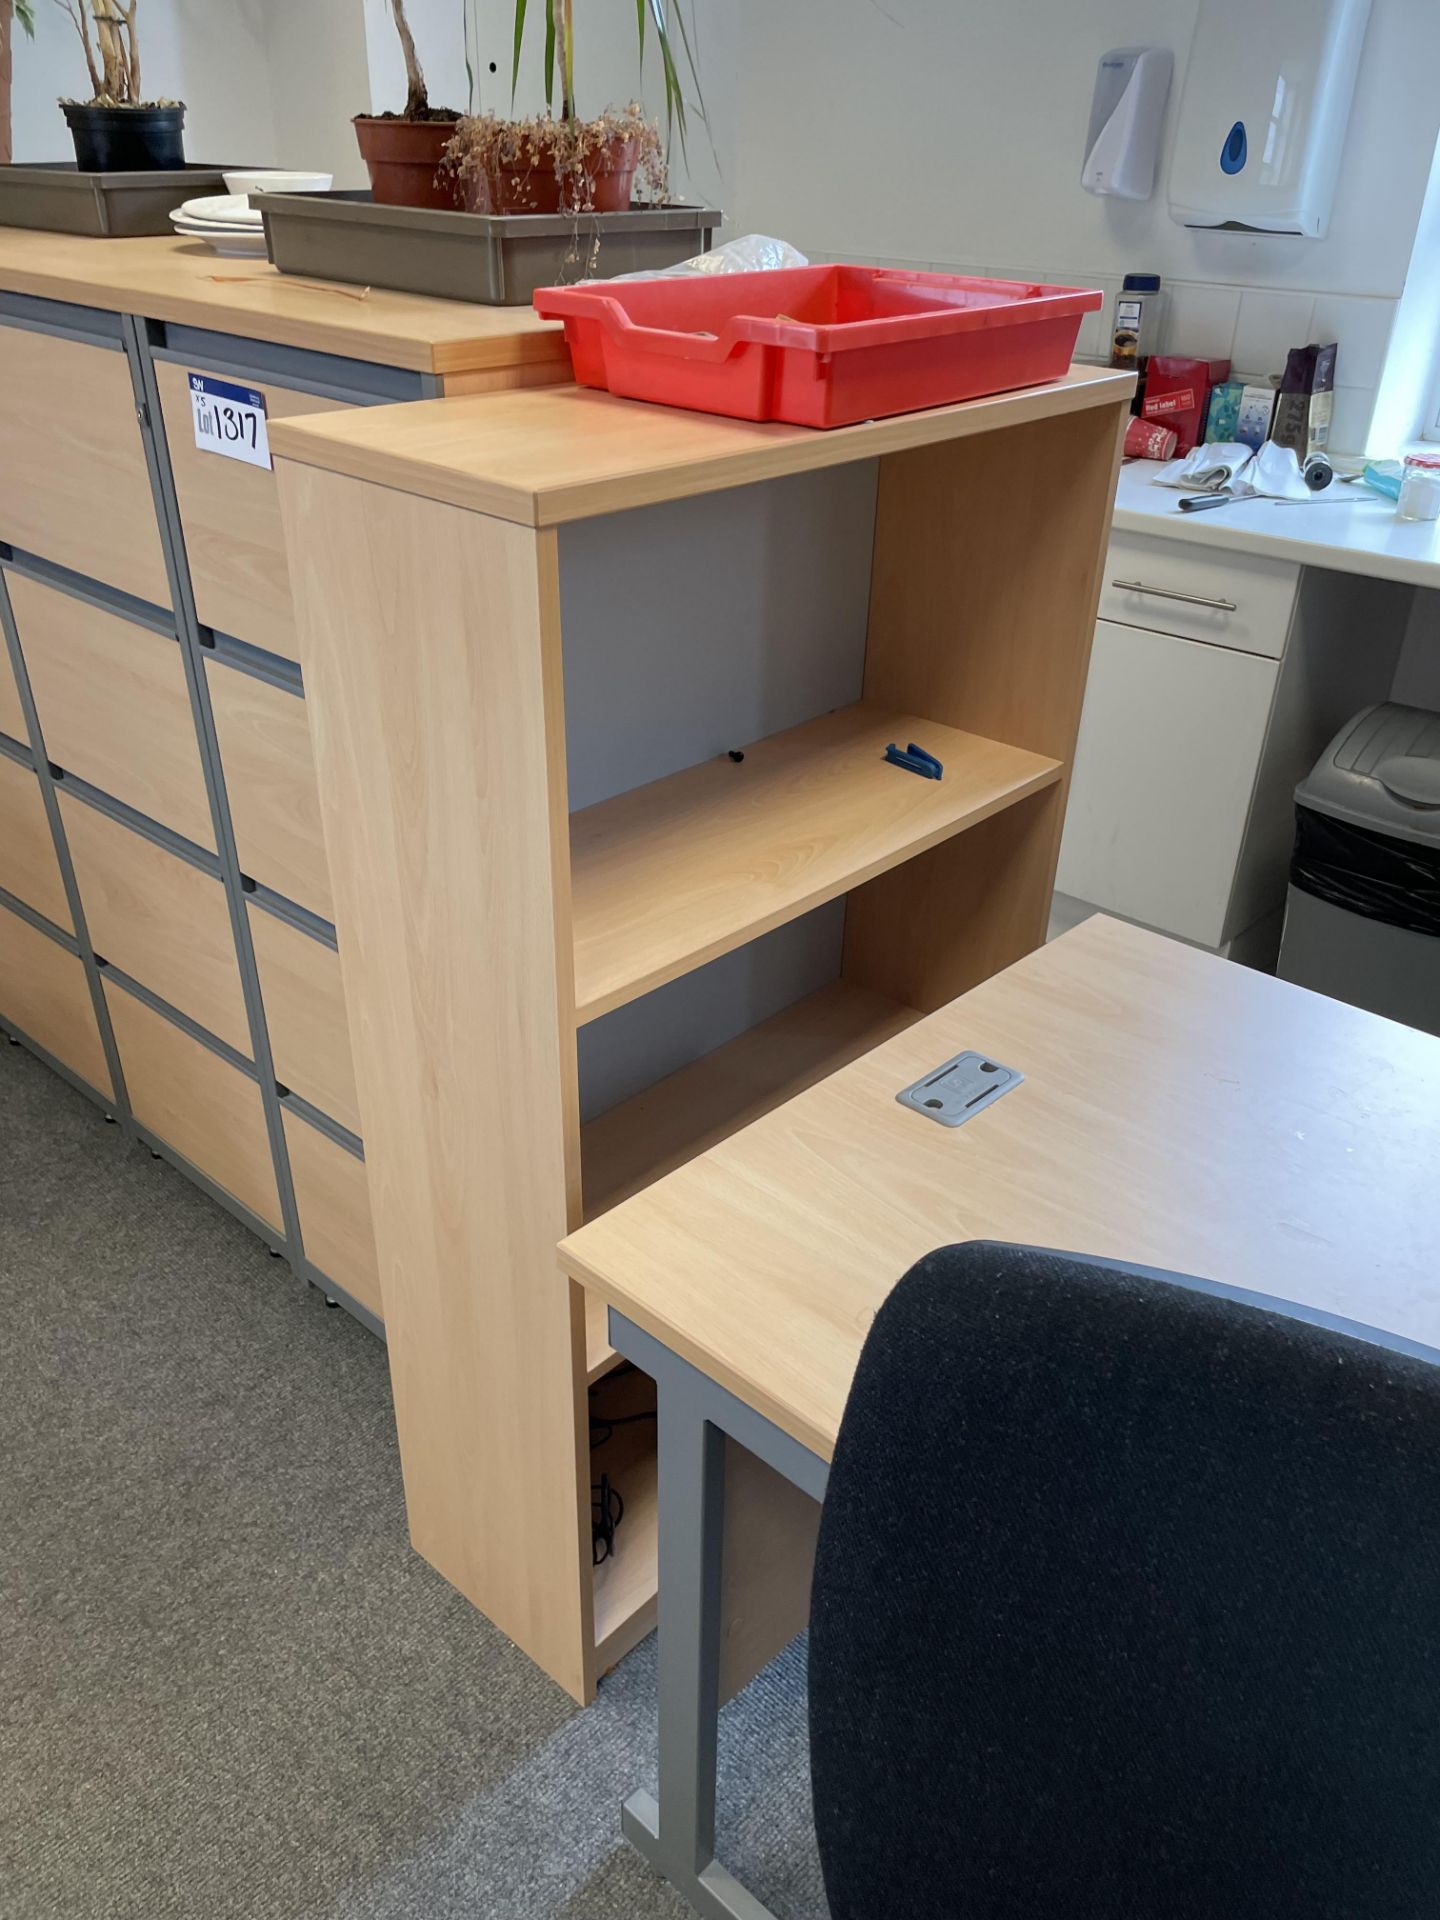 Three Shelving Units (Science First Floor Office) - Image 2 of 2